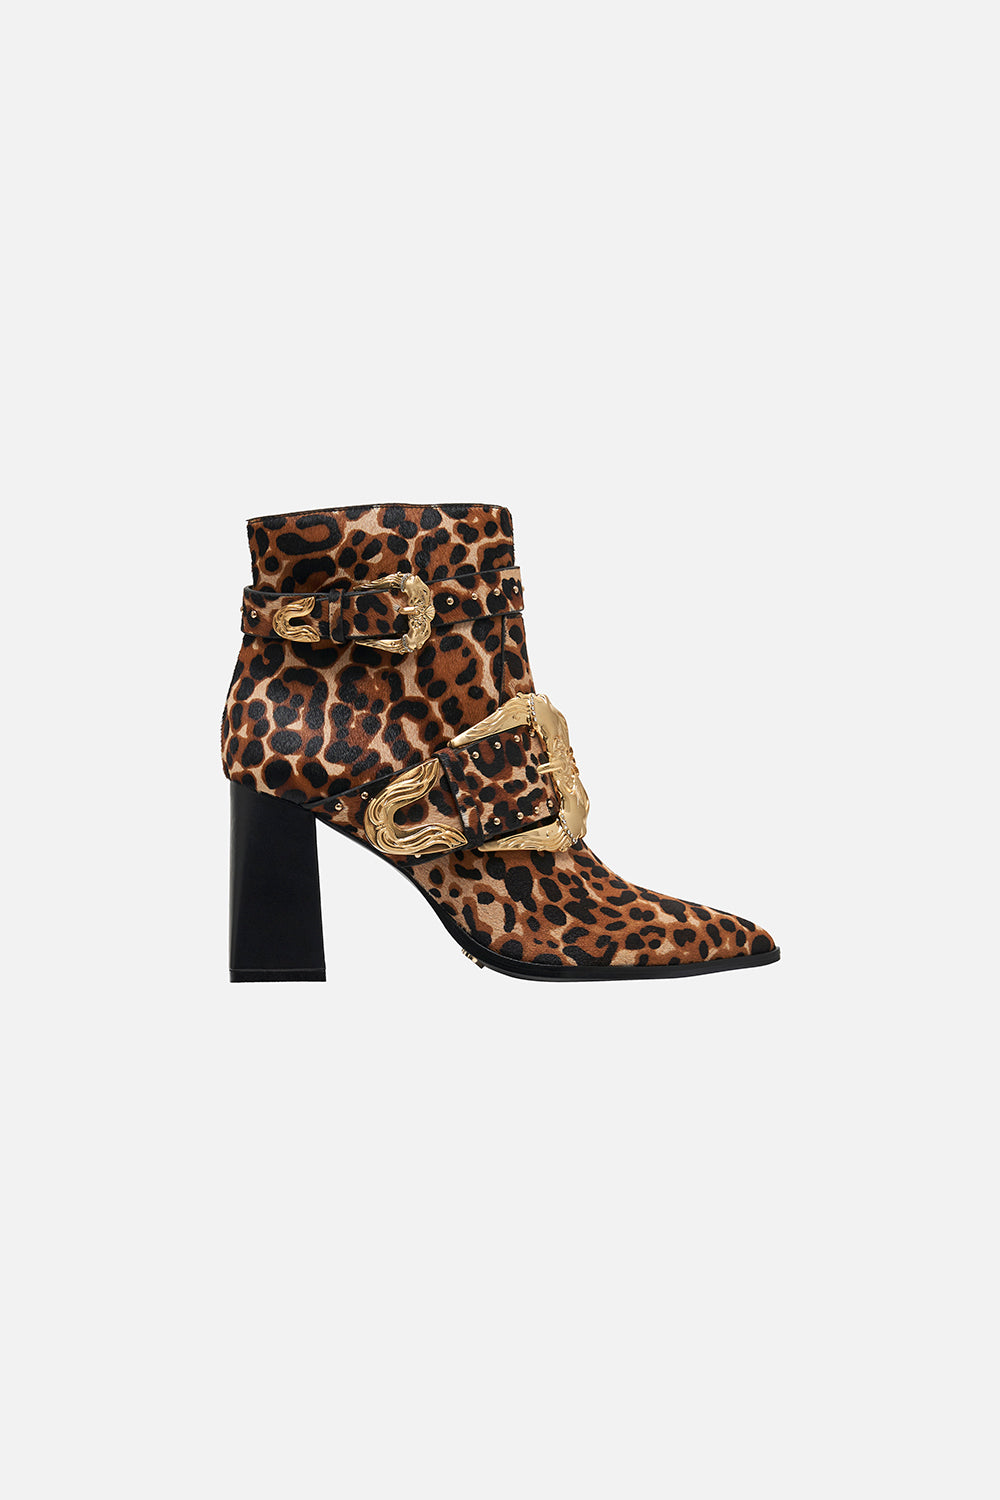 Sienna Block Heel Boot Role Call print by CAMILLA